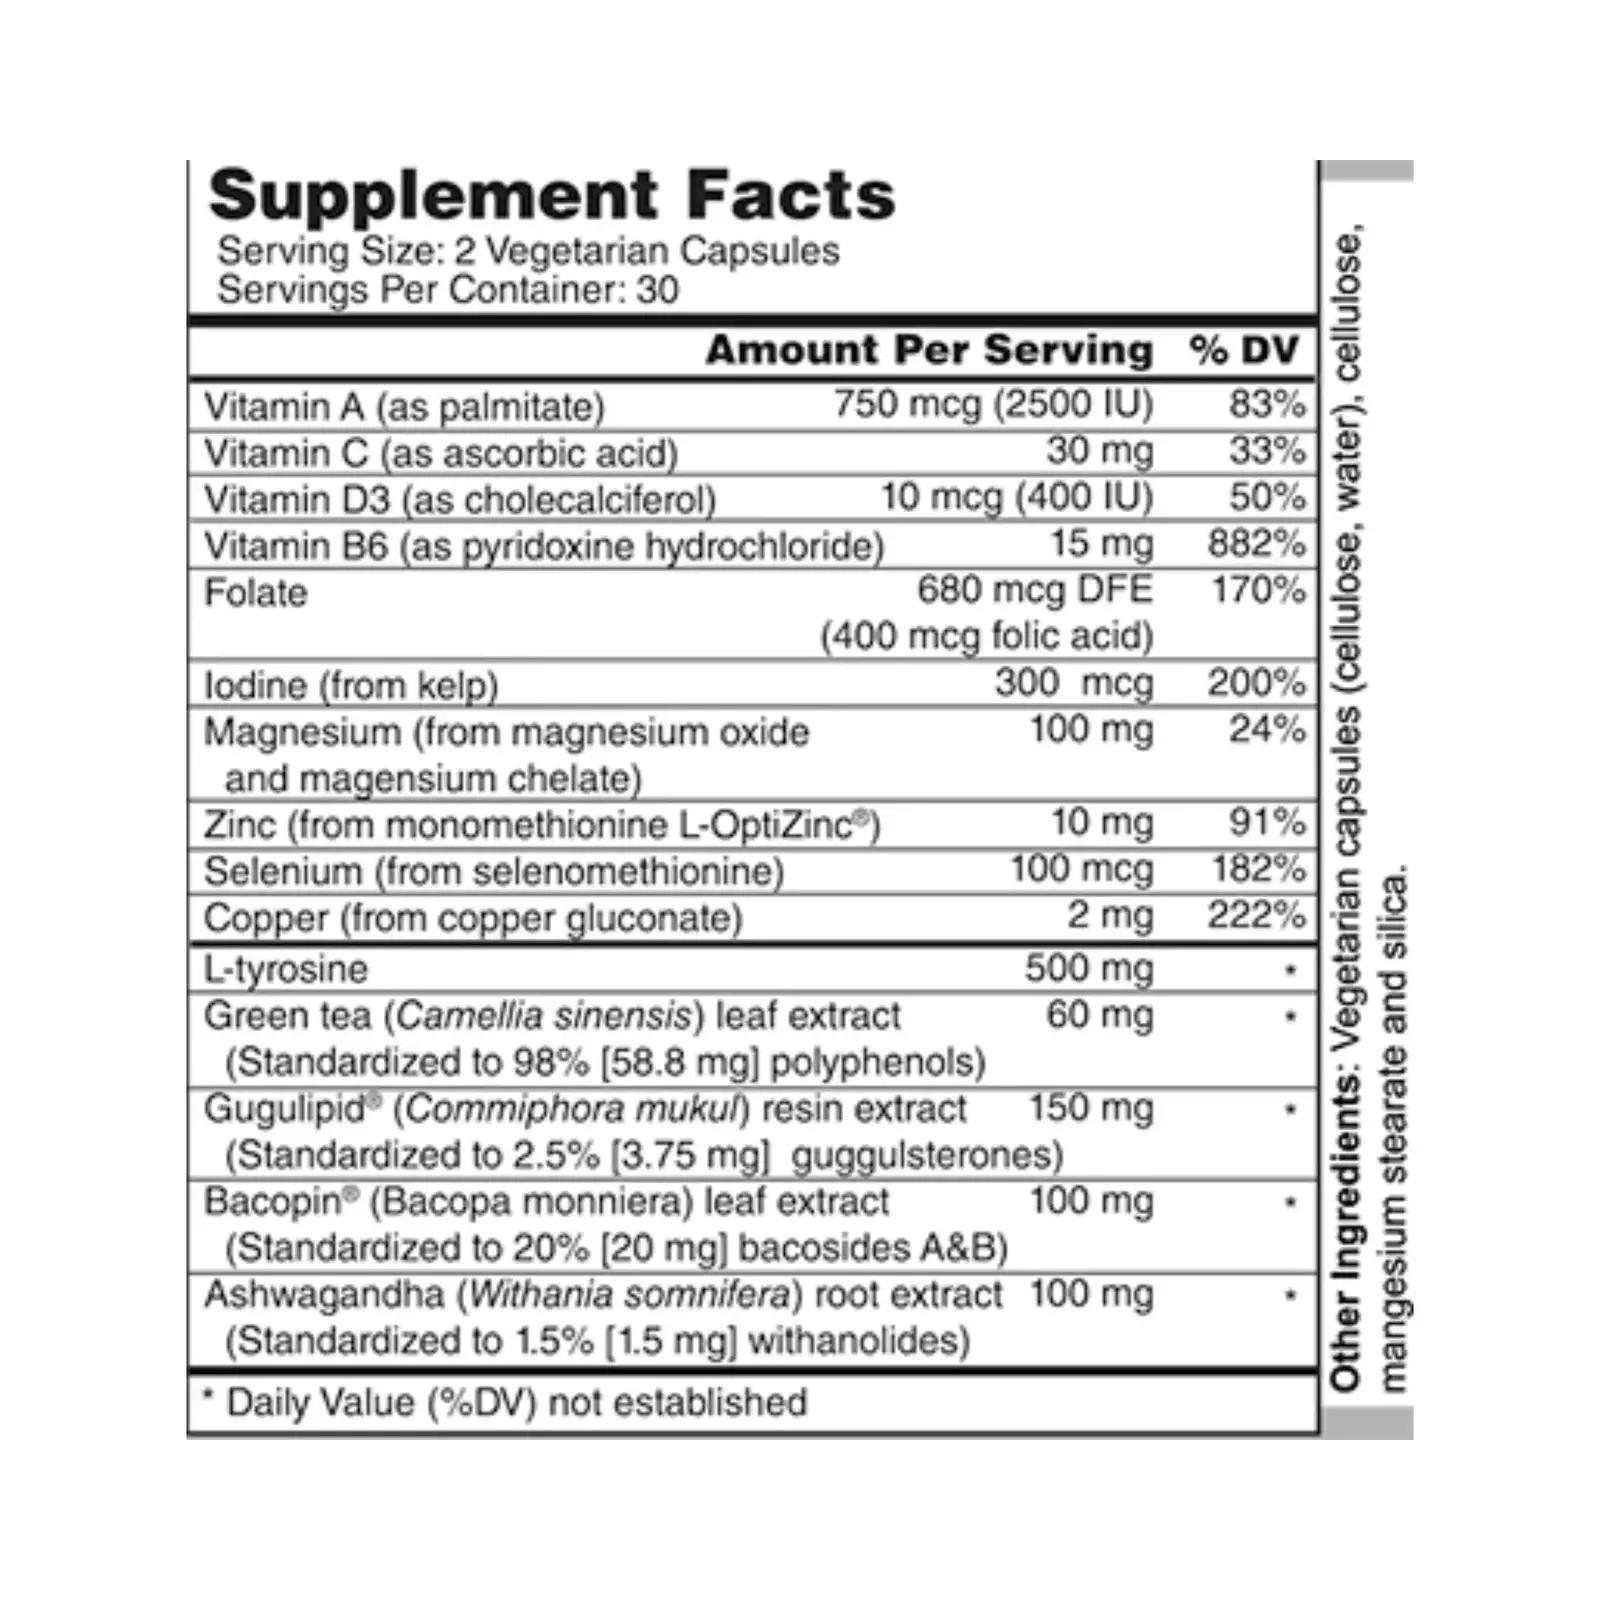 Thyroid Support with Zinc